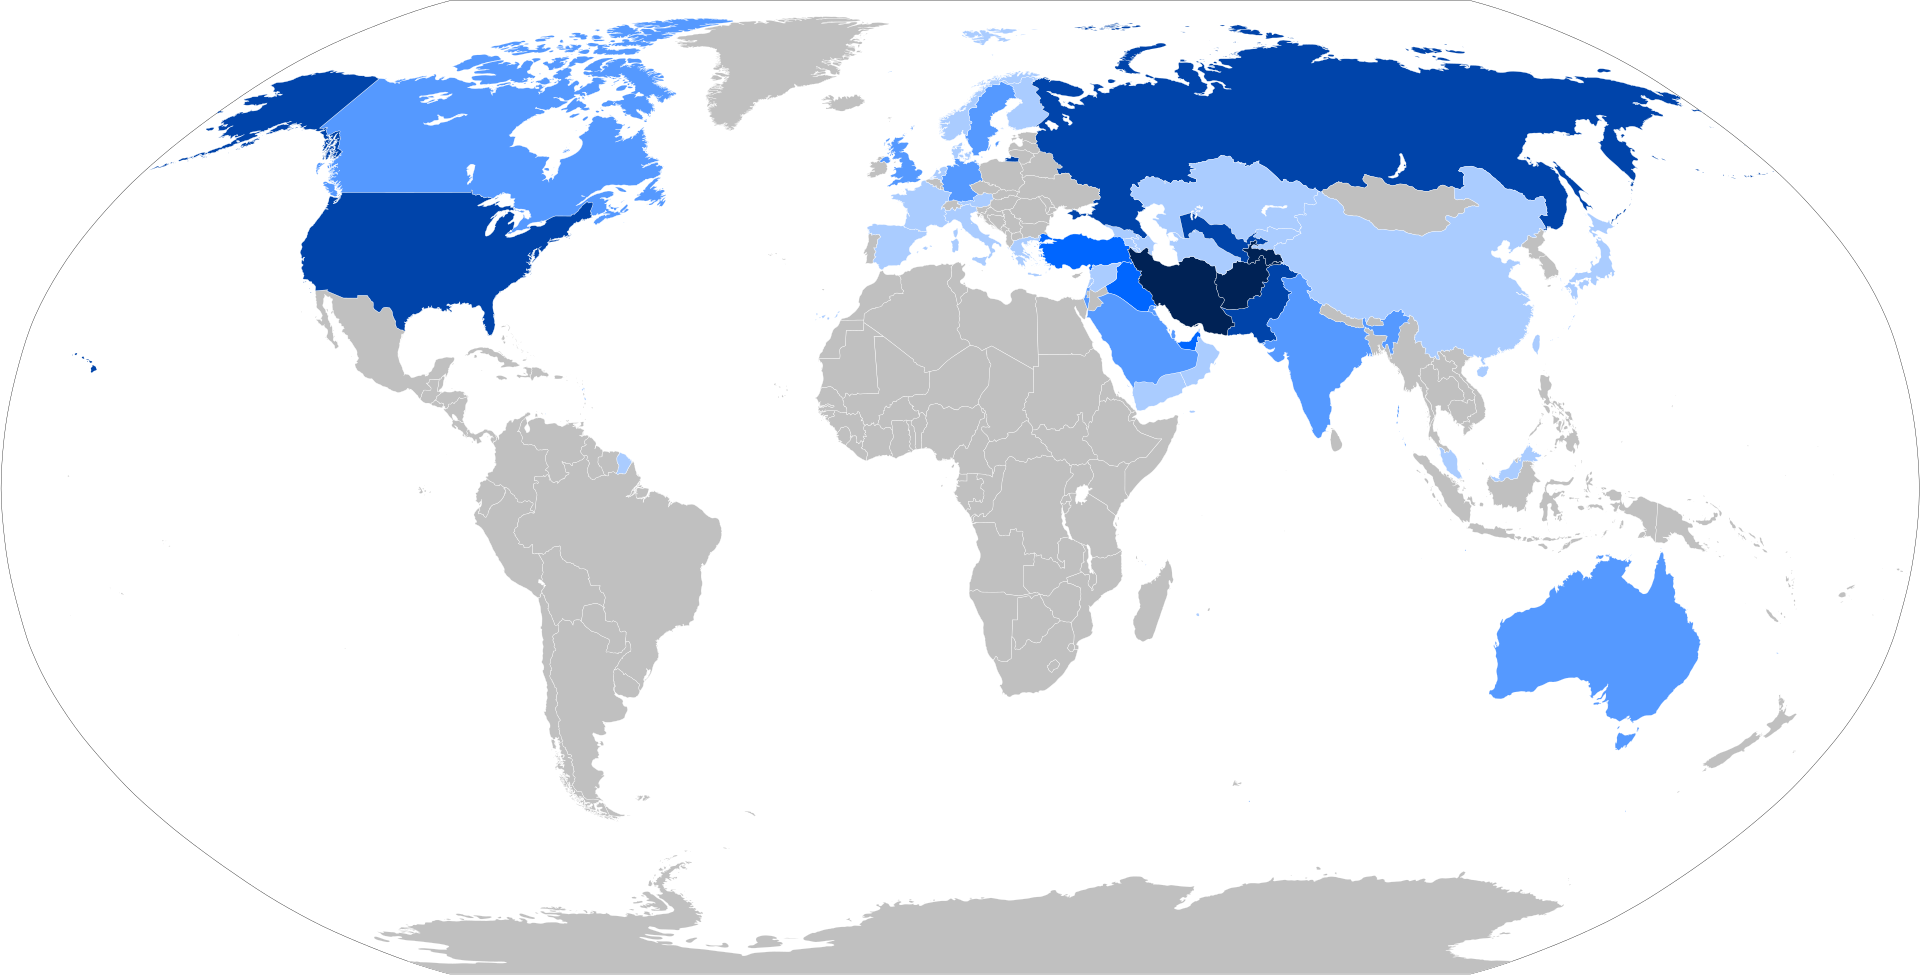 Map showing the presence of Persian speakers in the countries of the world by shades of blue